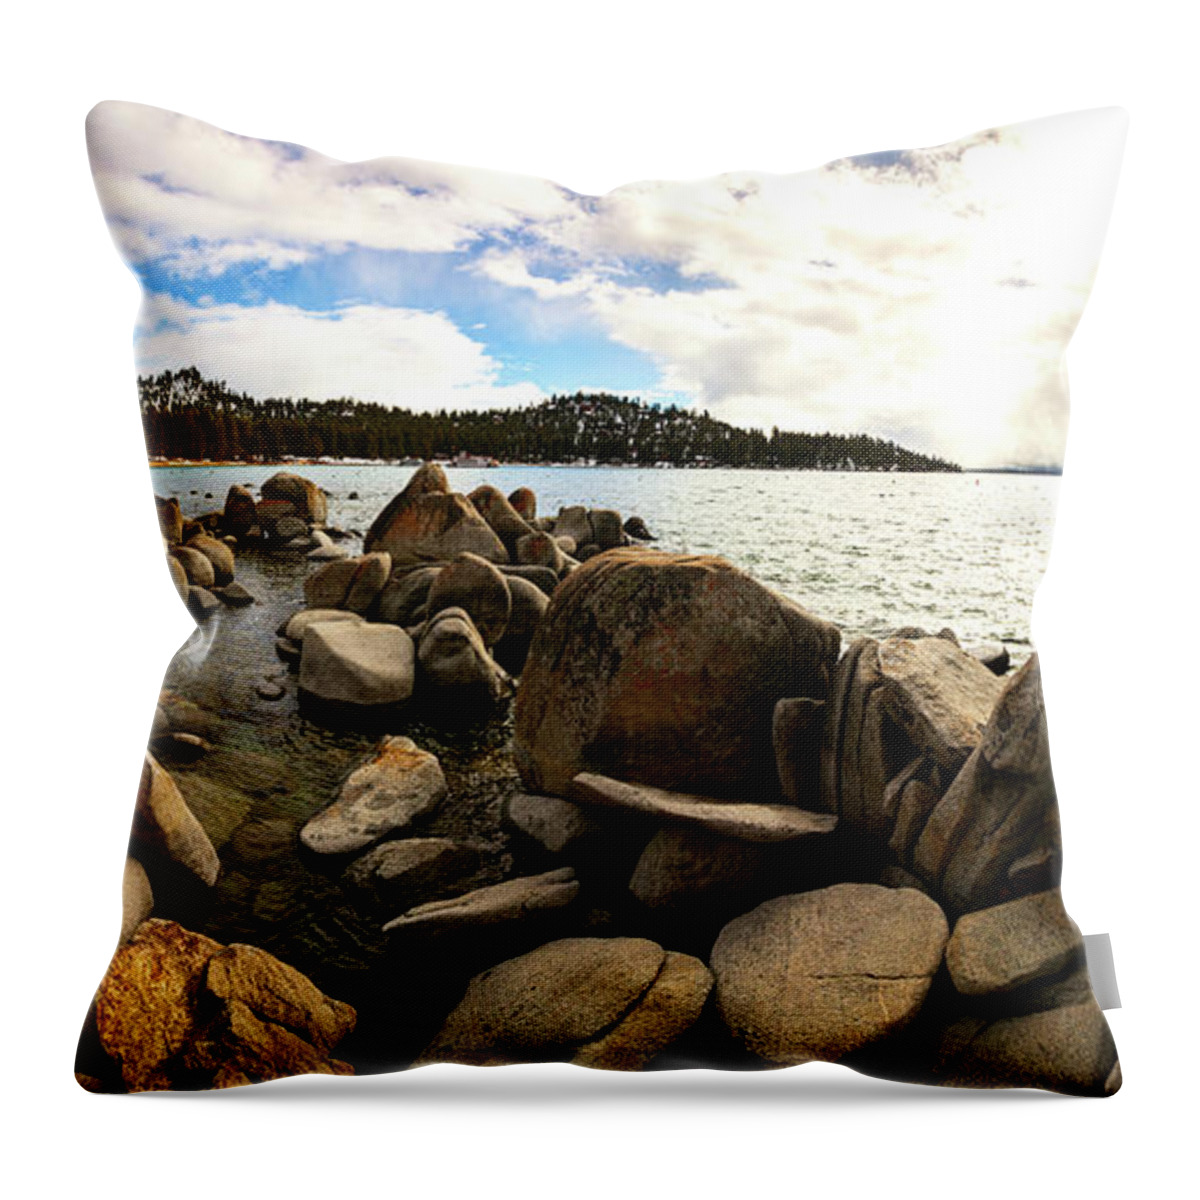 Lake Tahoe Throw Pillow featuring the photograph Nature's Stepping Stones by Ryan Huebel